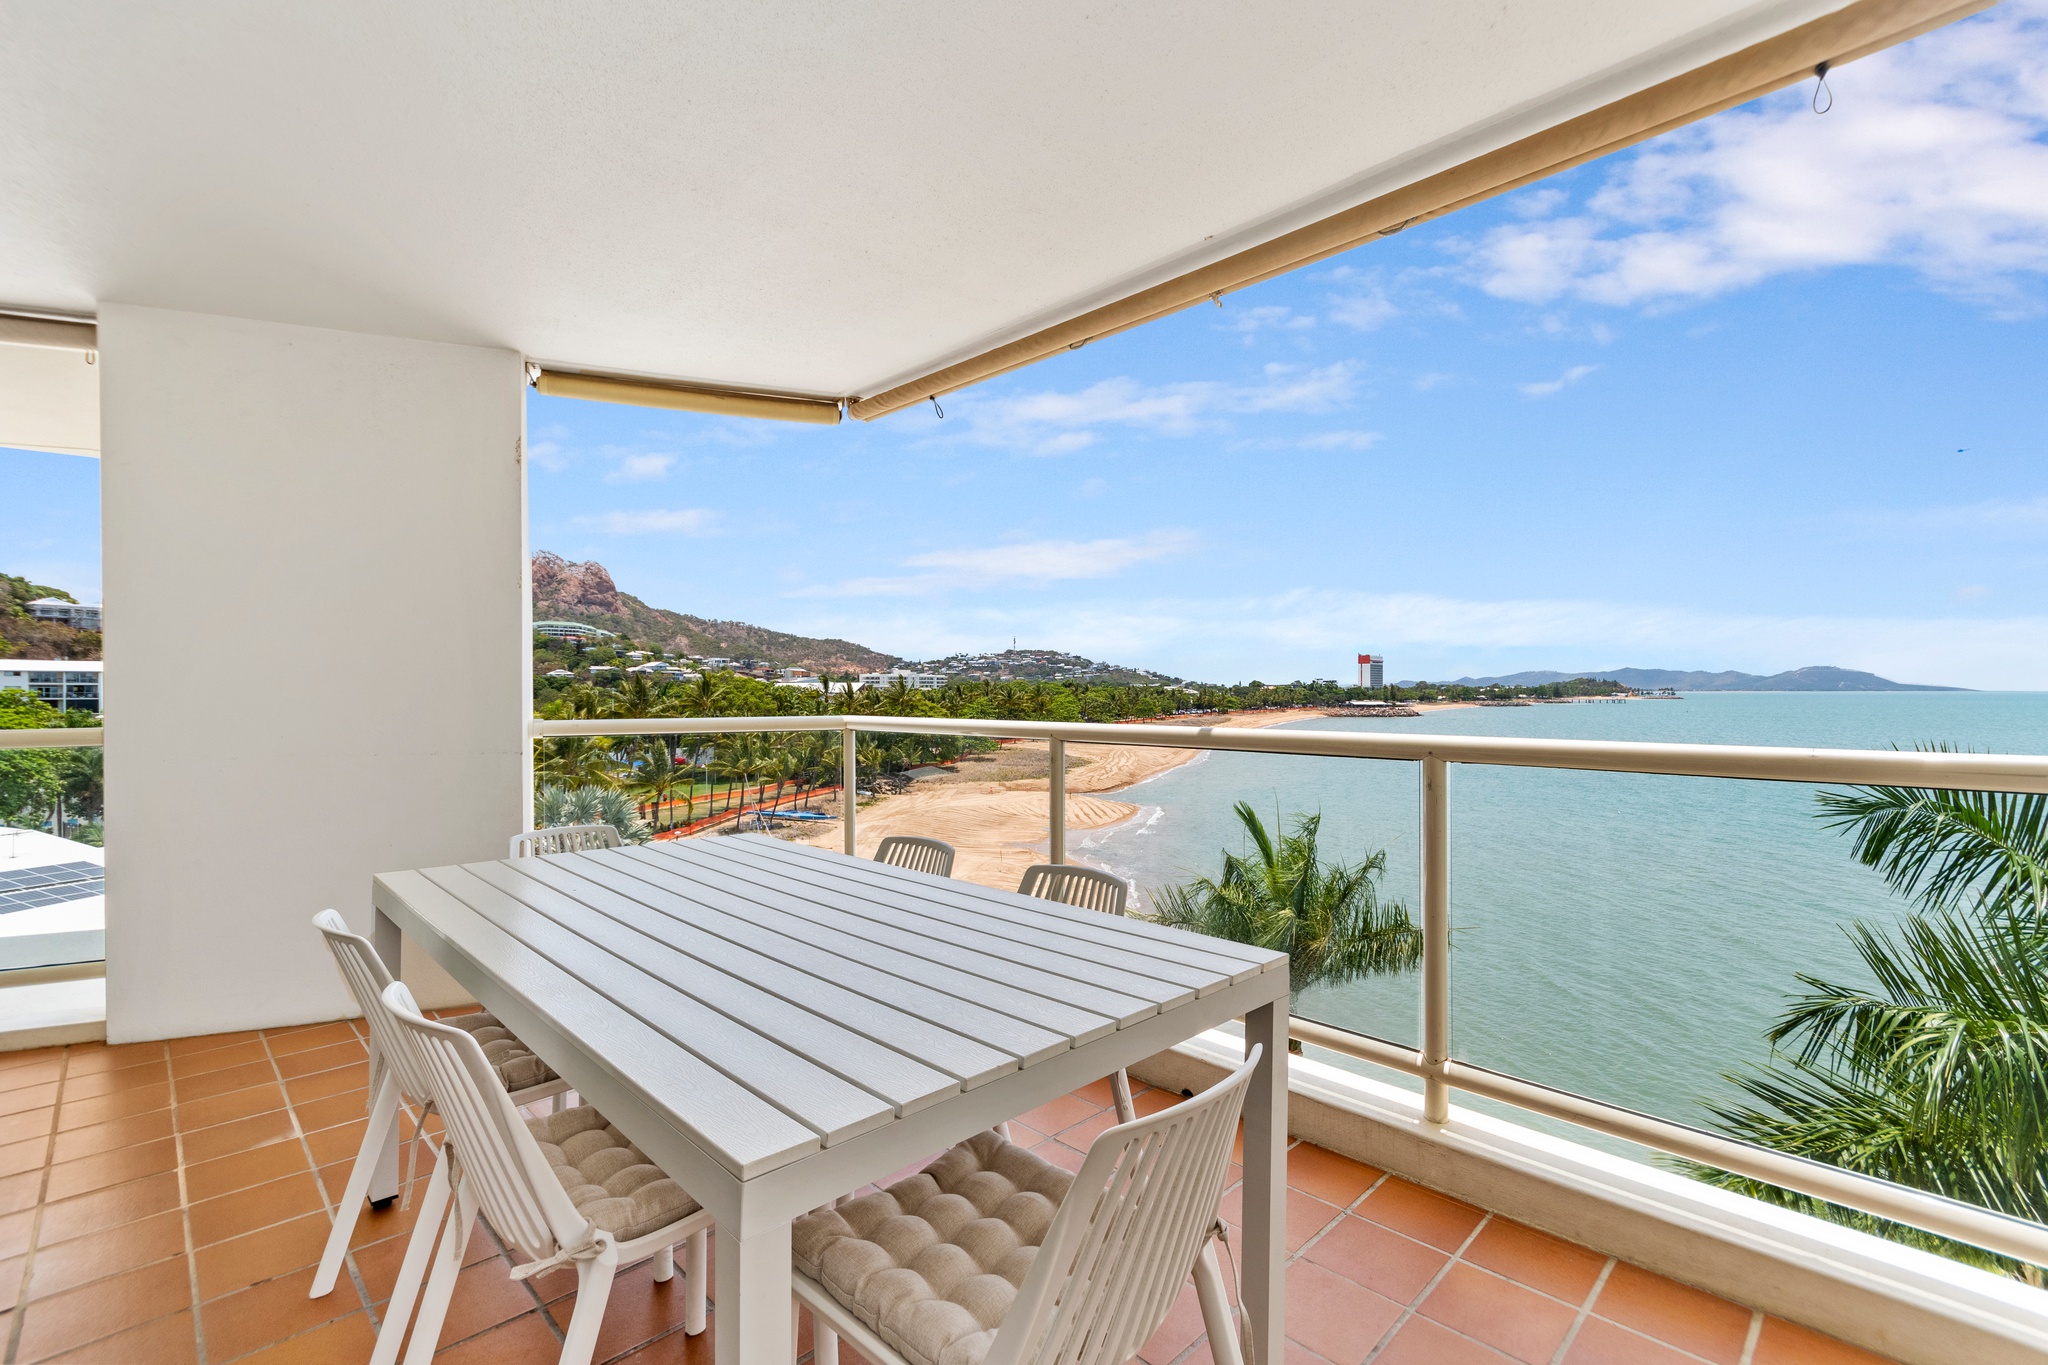 3 Bedroom Accommodation Townsville located on the Strand